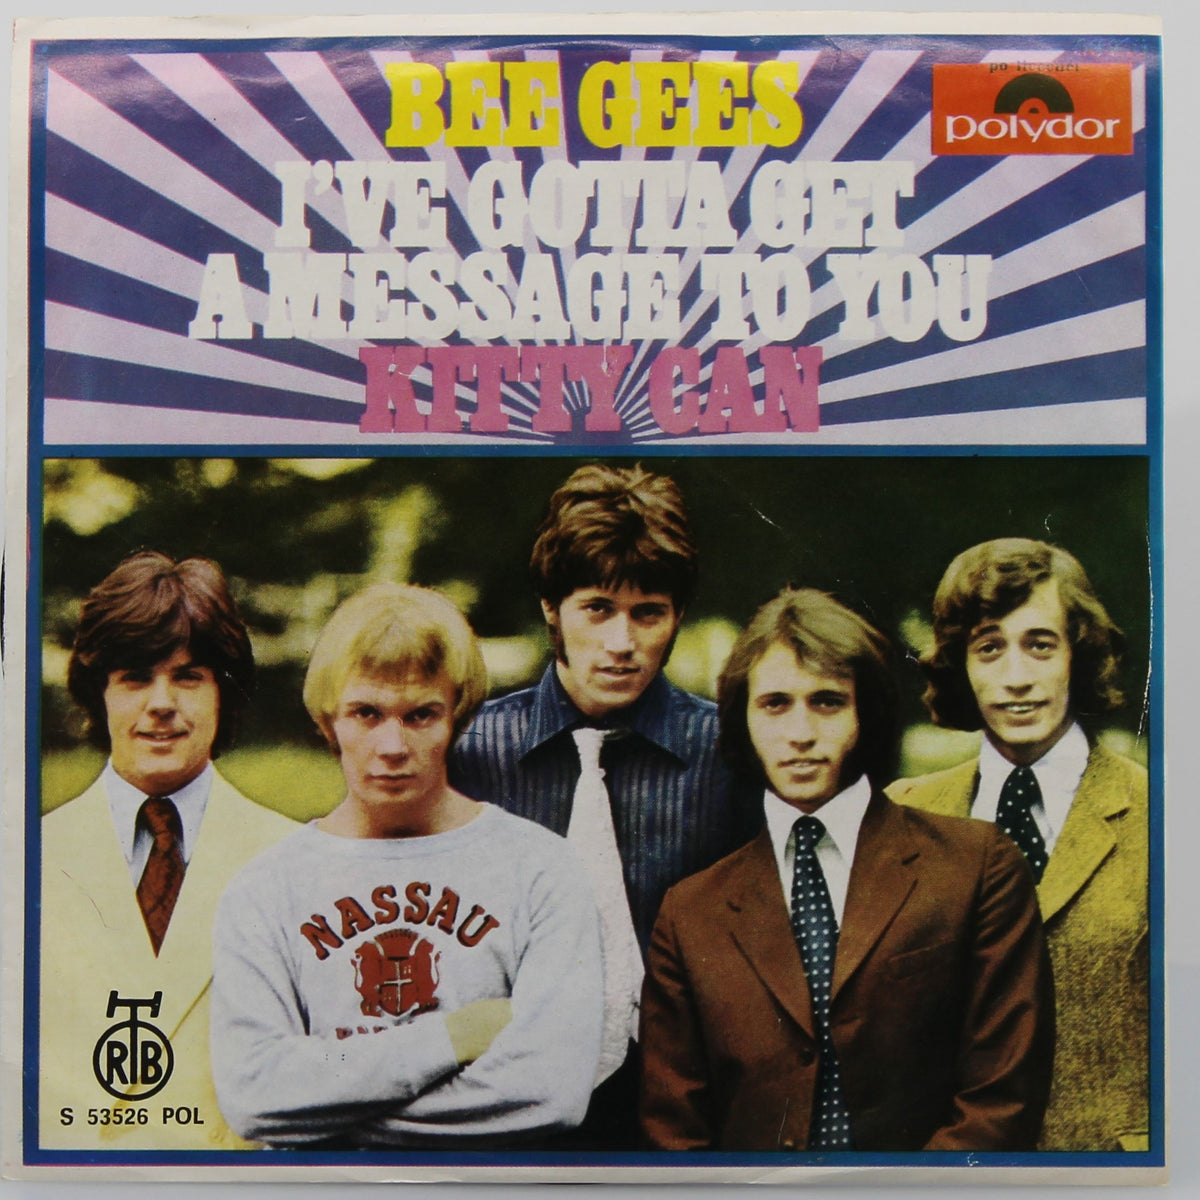 Bee Gees - I&#39;ve Gotta Get A Message To You, Polydor, Vinyl 7&quot; single, 45 RPM, Yougoslavia 1968